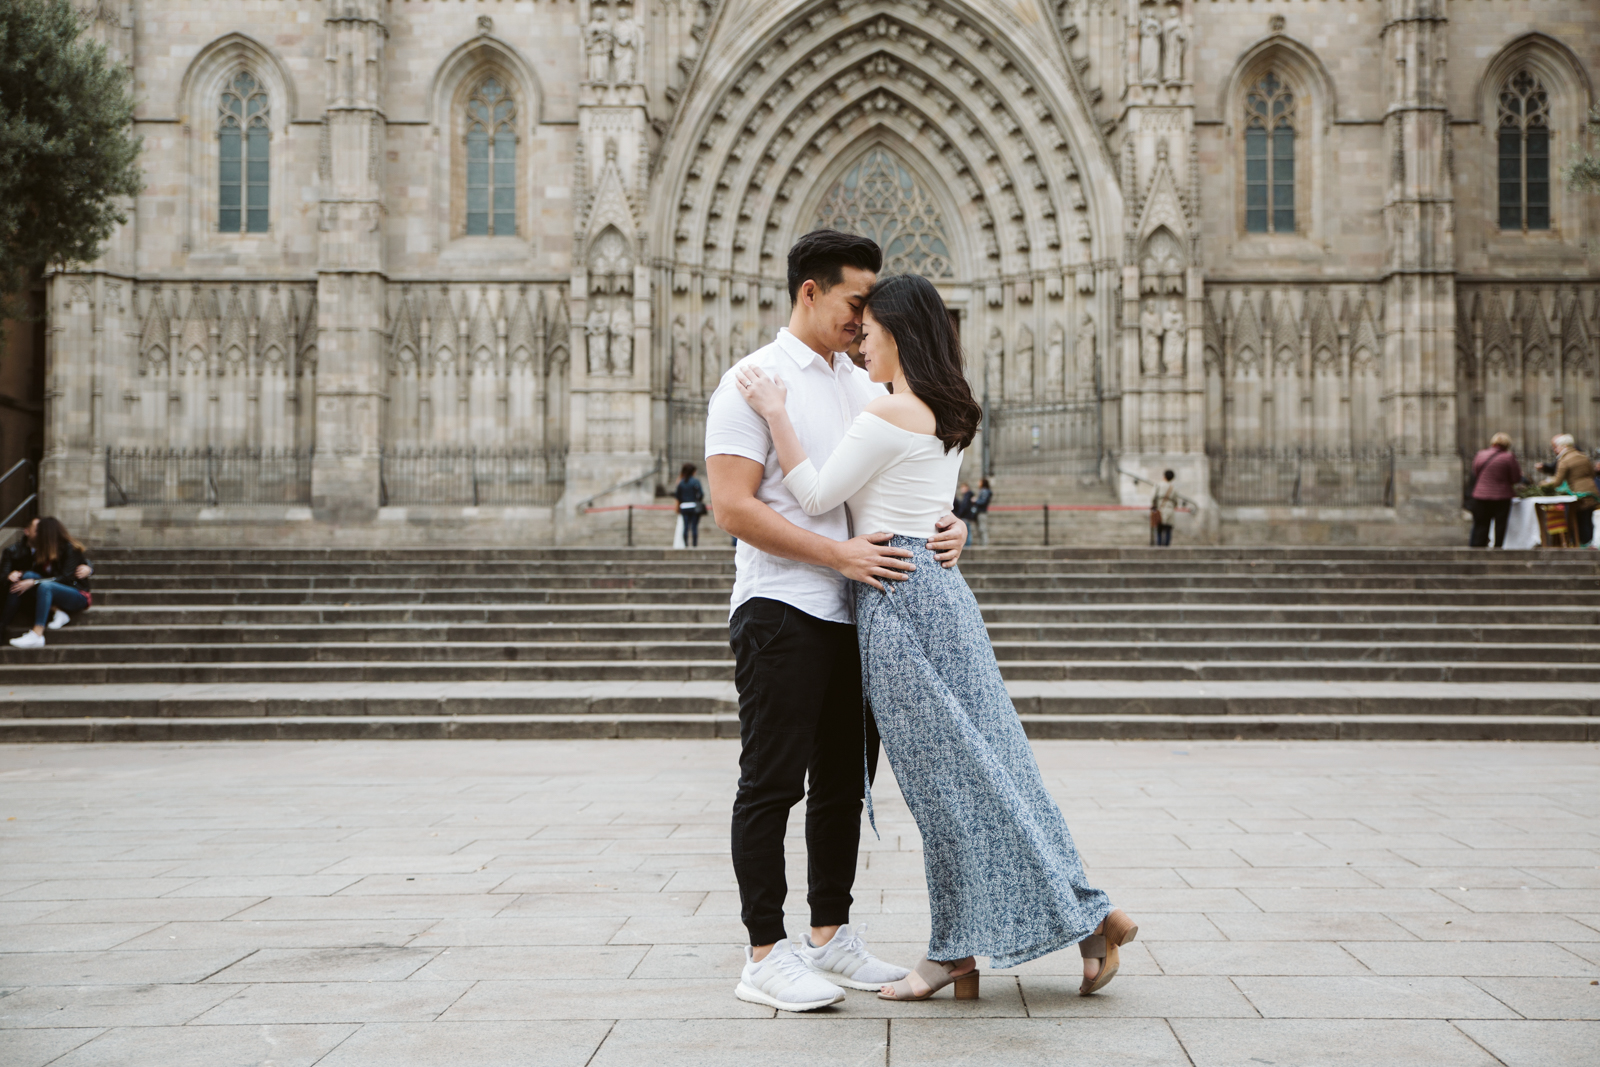 Engagement photo session in Barcelona | Natalia Photography